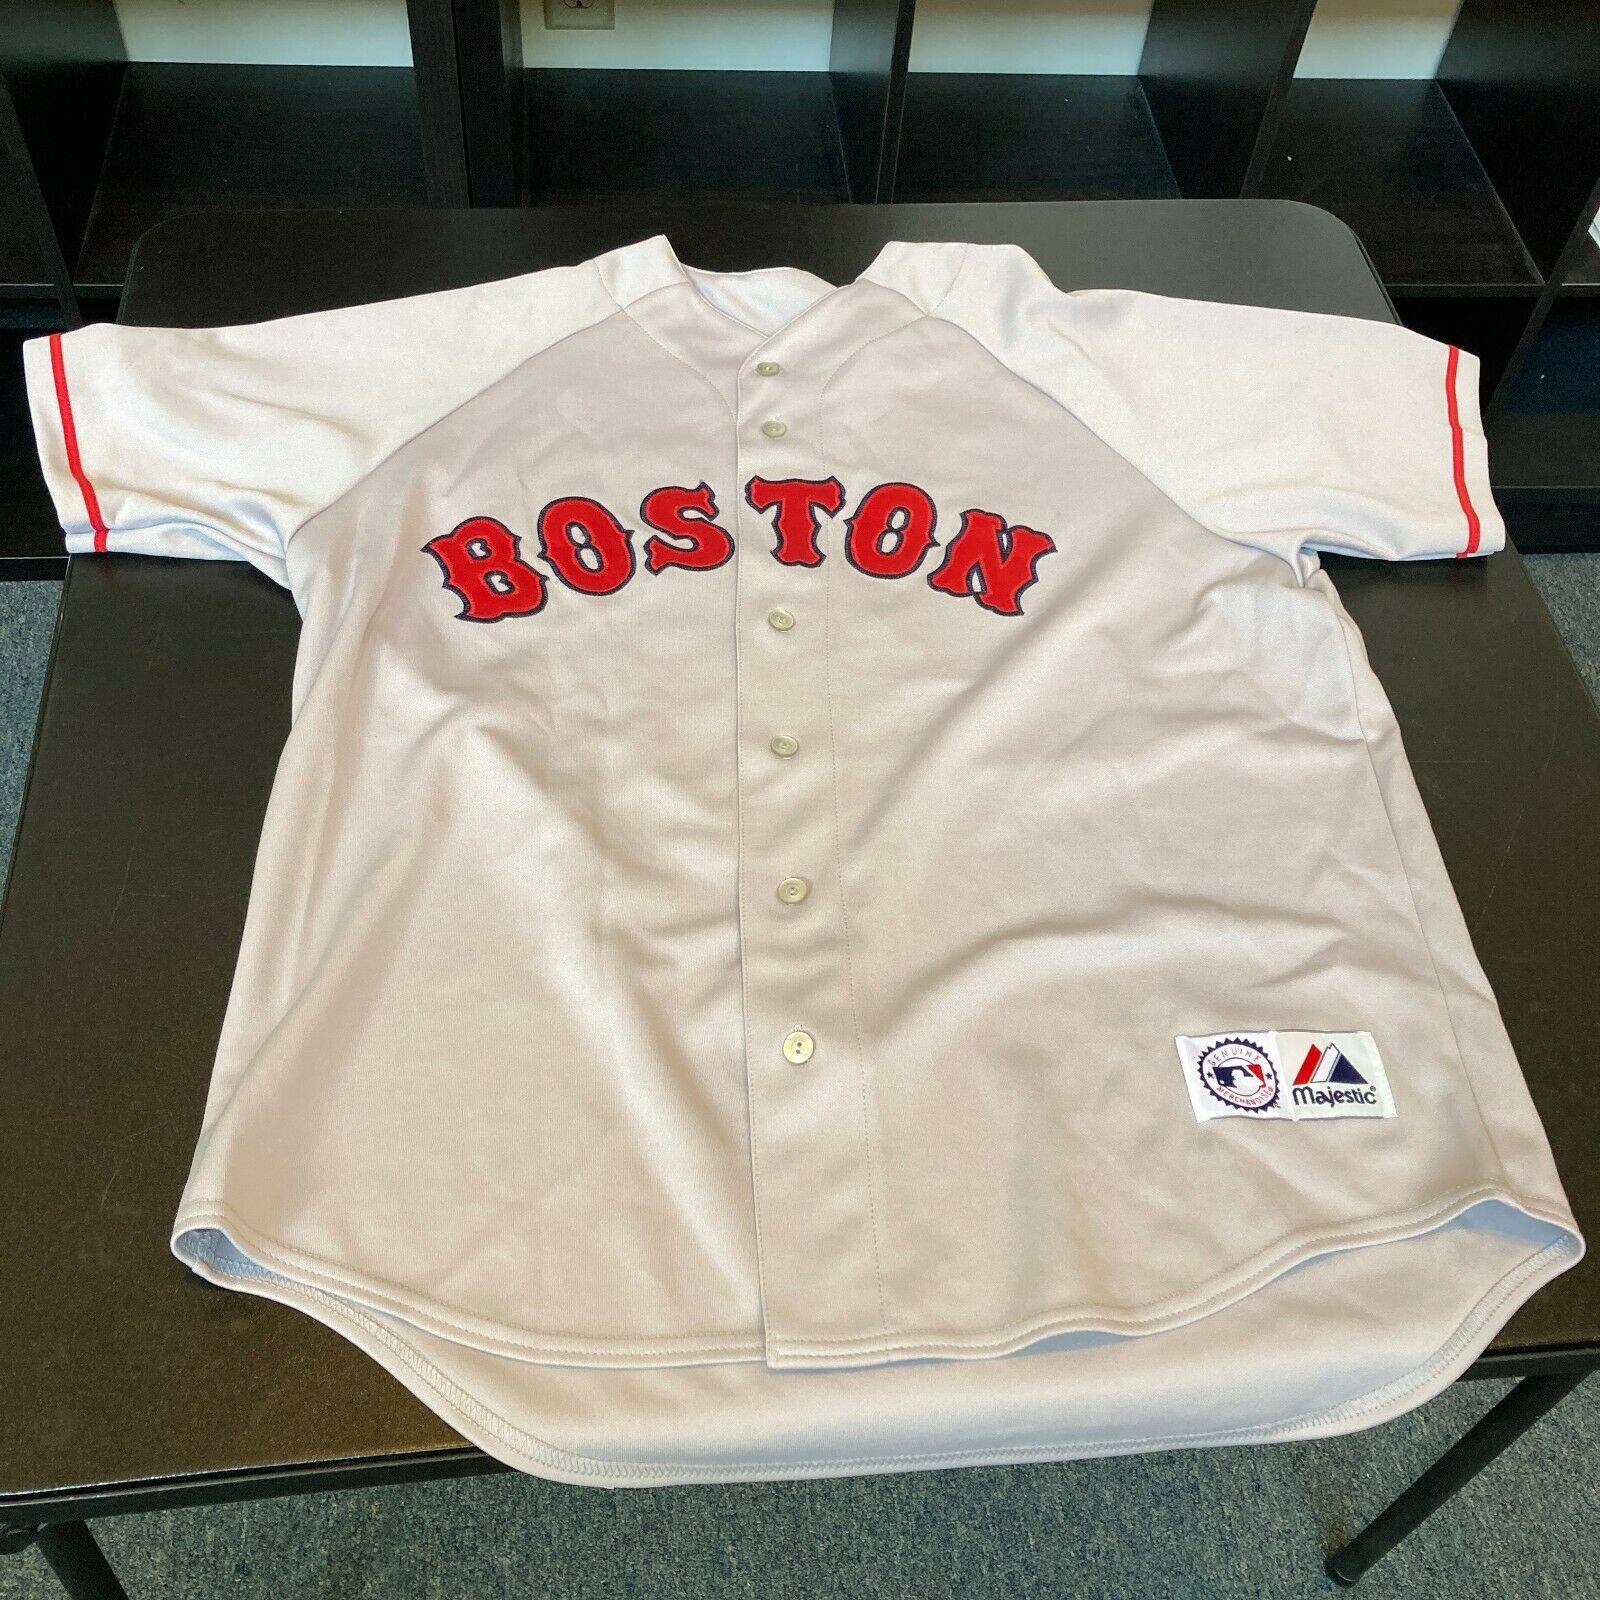 Manny Ramirez Signed Authentic Boston Red Sox Jersey Tristar & MLB Authentic